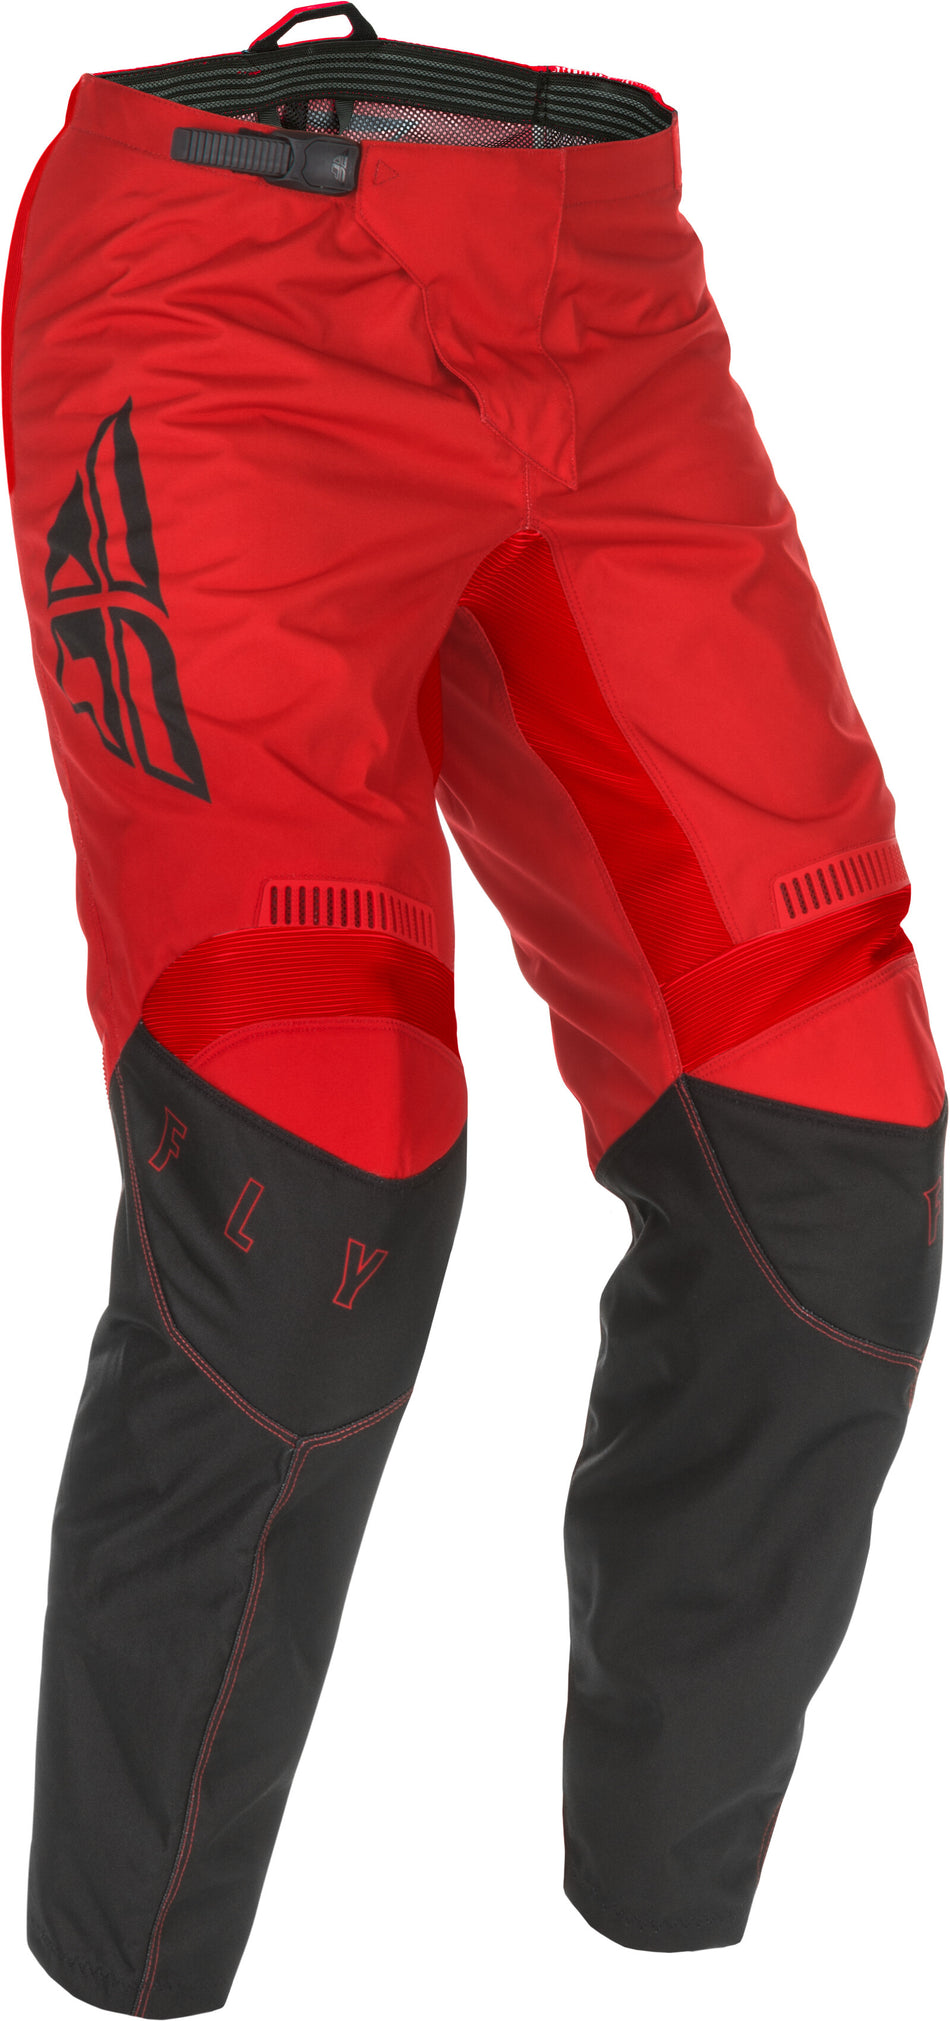 FLY RACING Youth F-16 Pants Red/Black Sz 22 374-93222